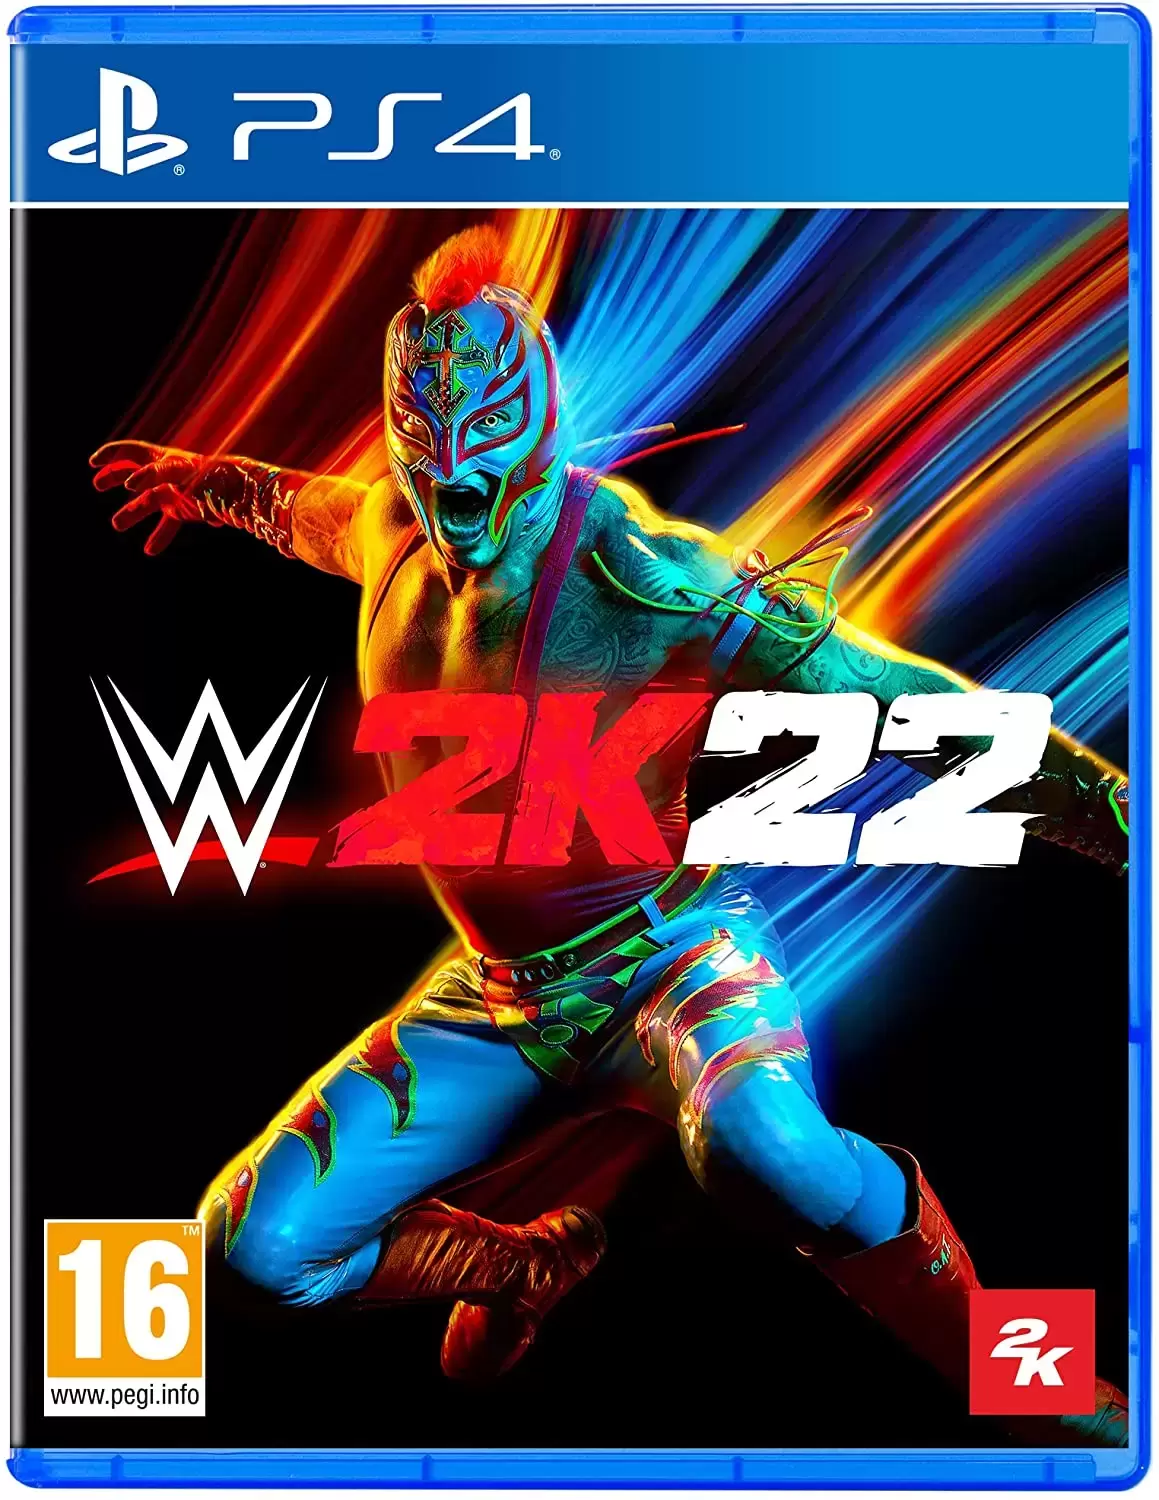 PS4 Games - Wwe 2k22